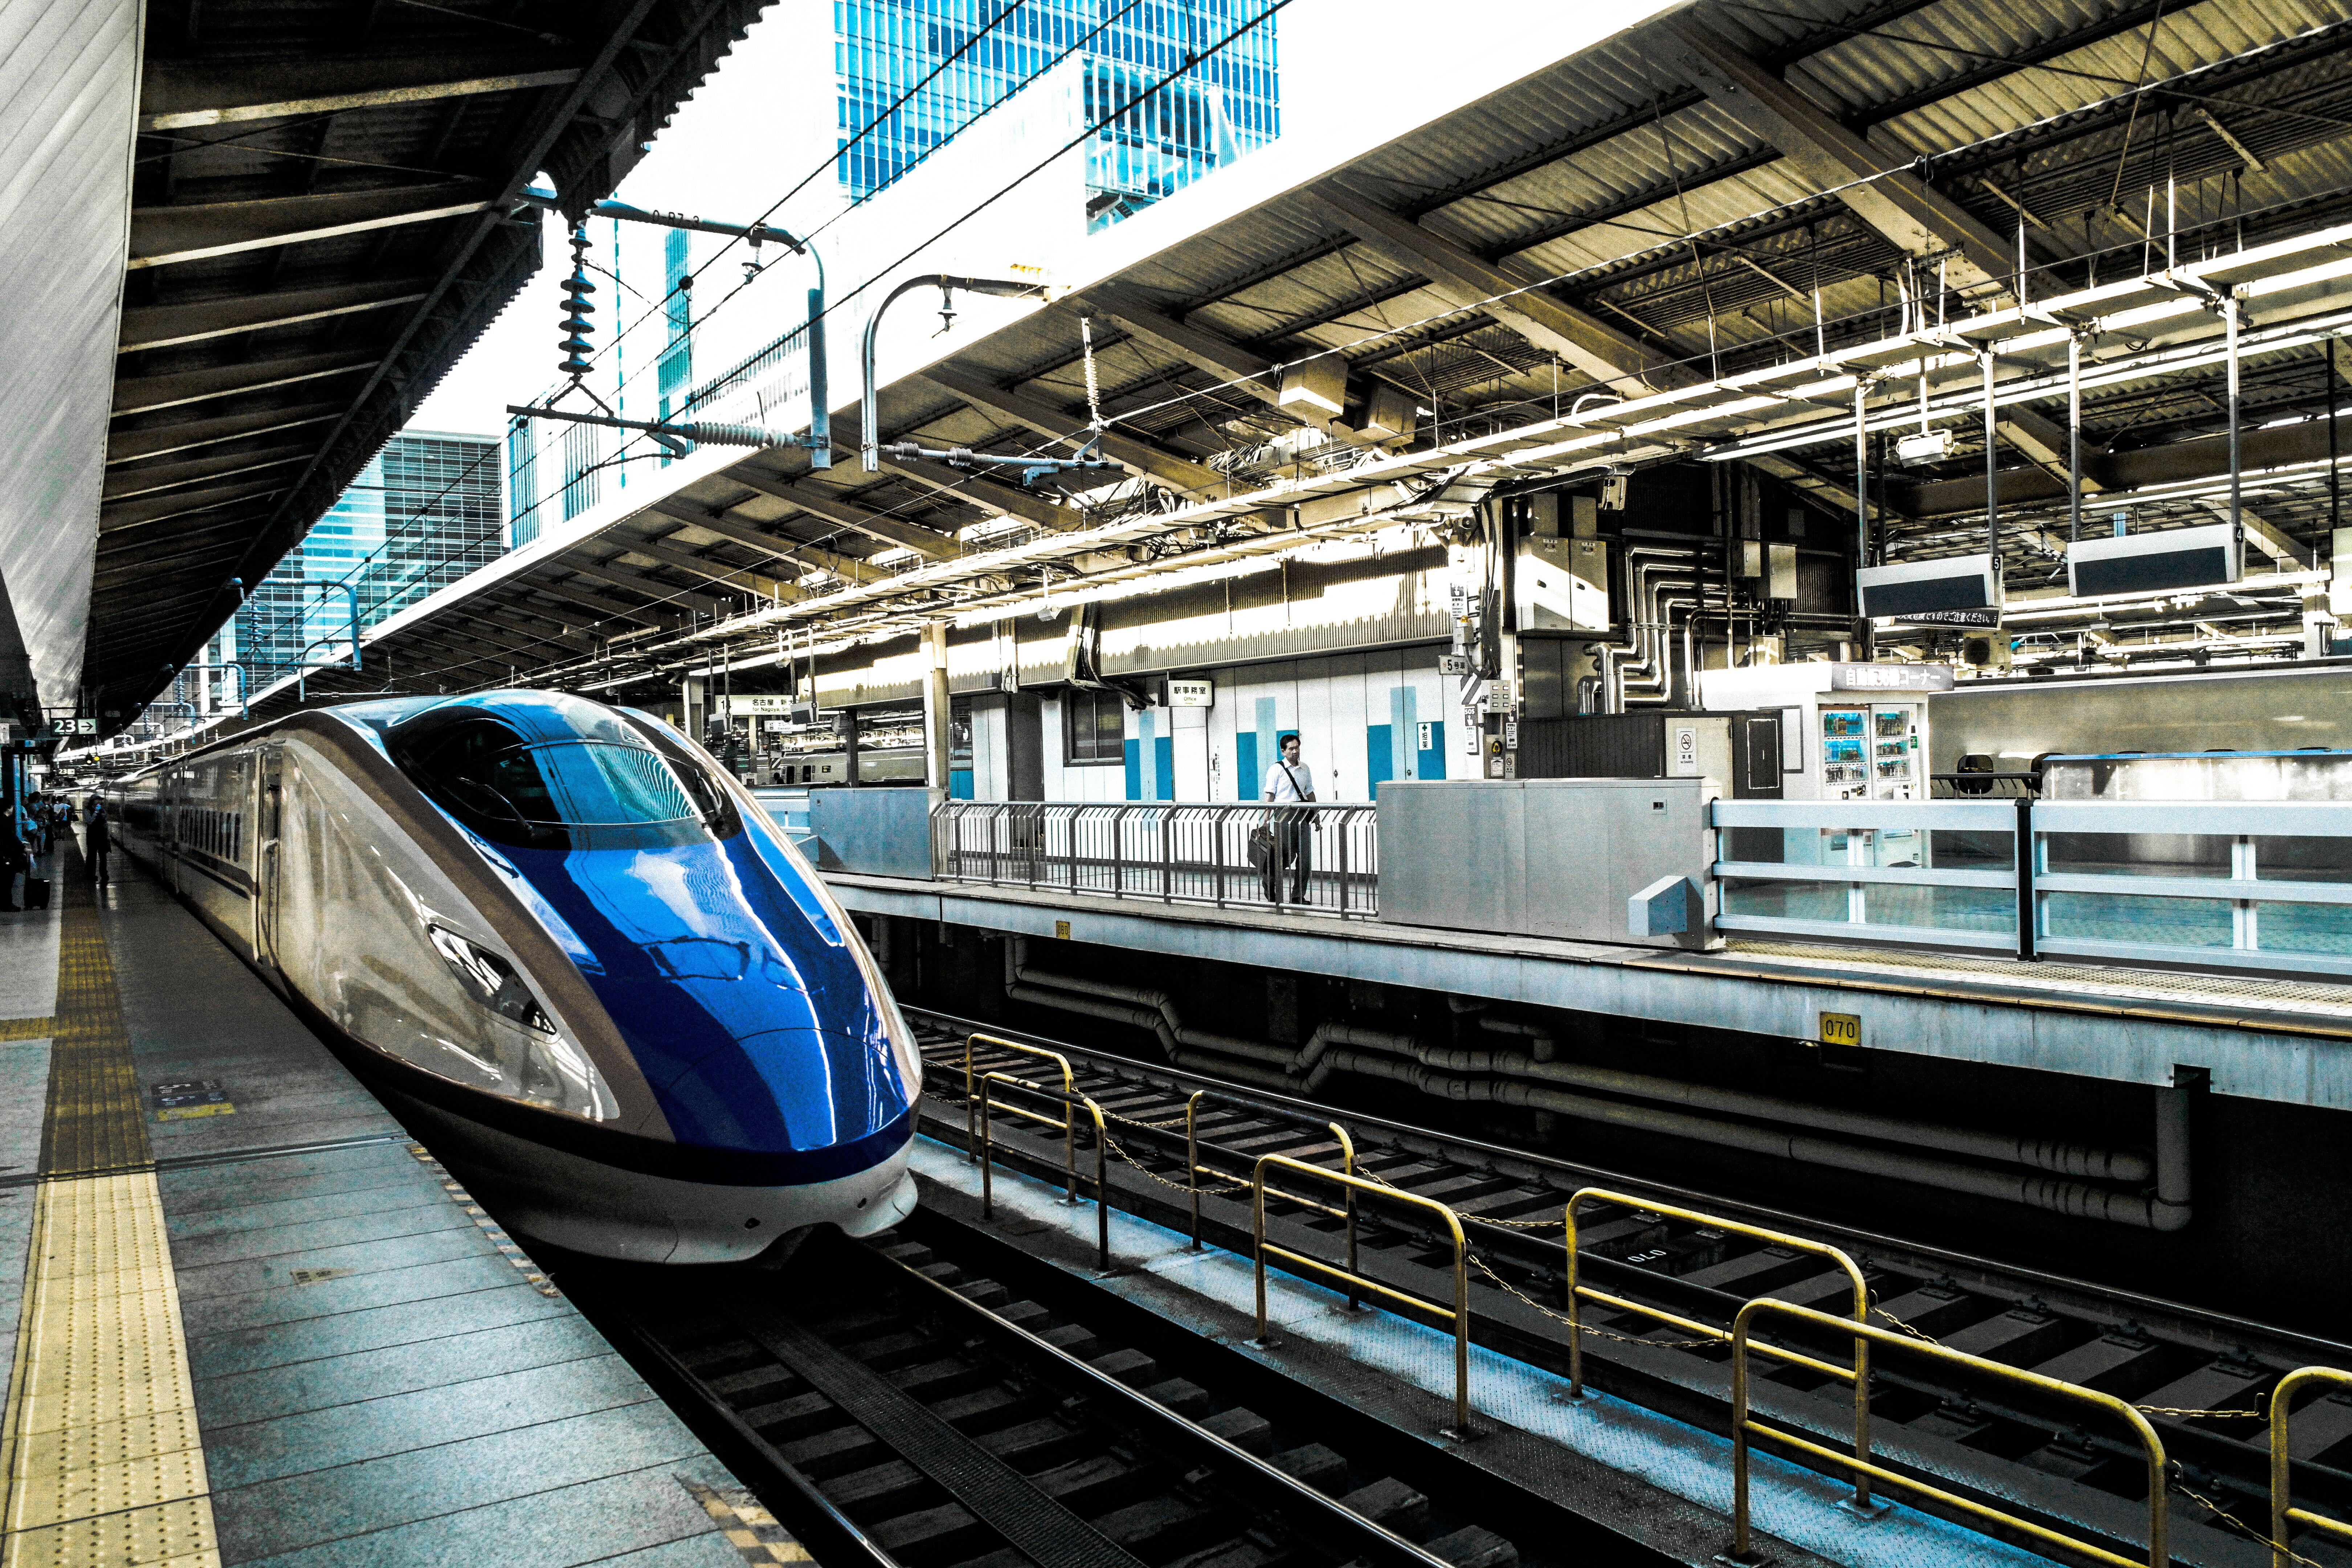 Bullet Train HD Wallpaper Image. Free Stock Image Library